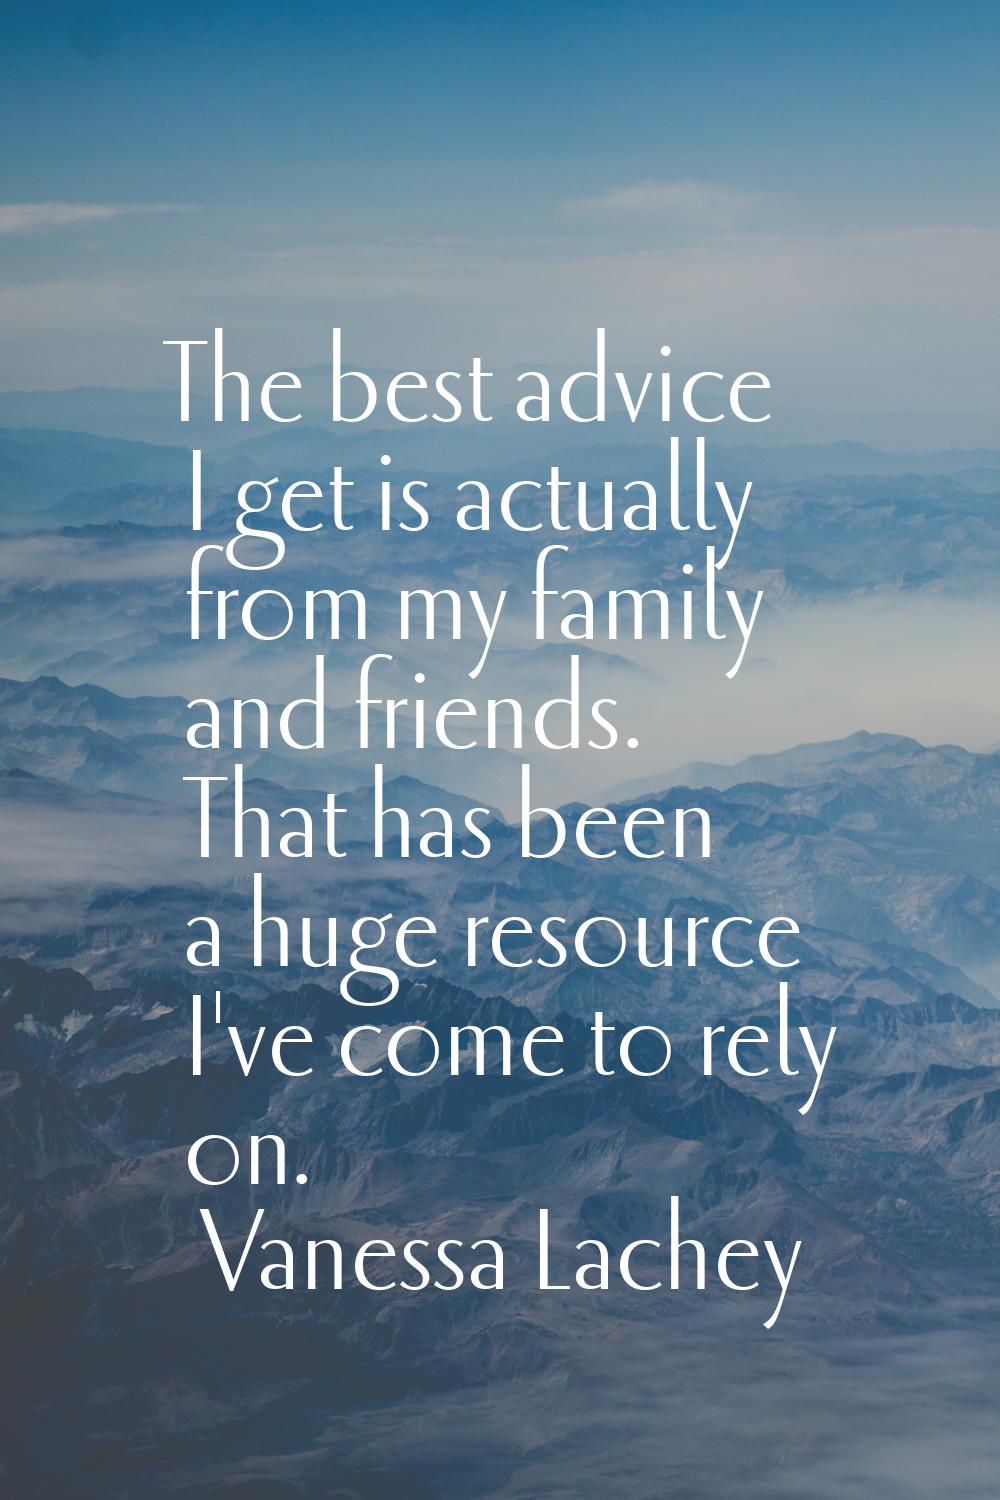 The best advice I get is actually from my family and friends. That has been a huge resource I've co